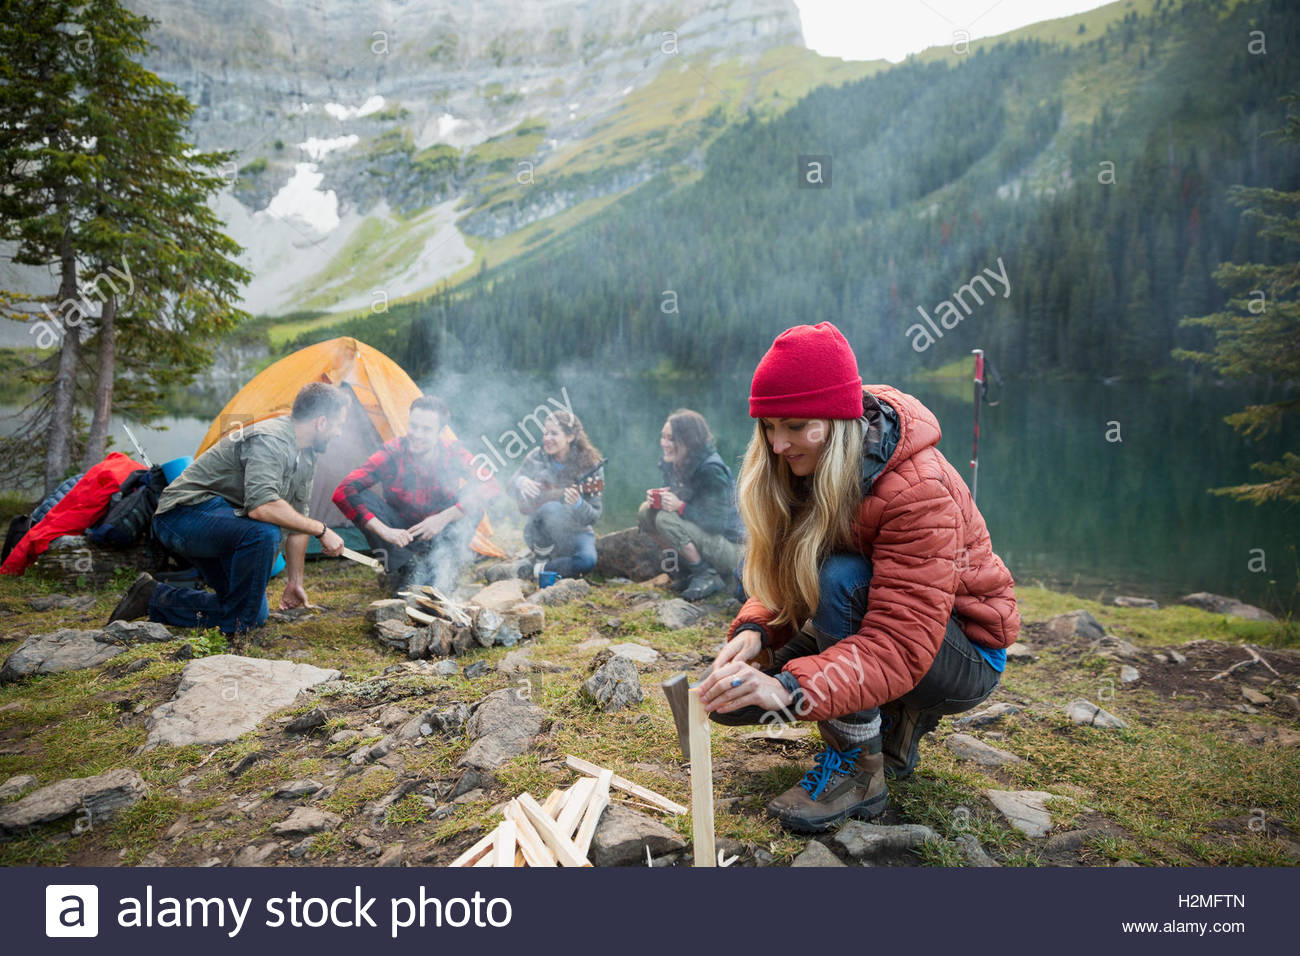 Woman splitting firewood at remote lakeside campsite Stock Photo